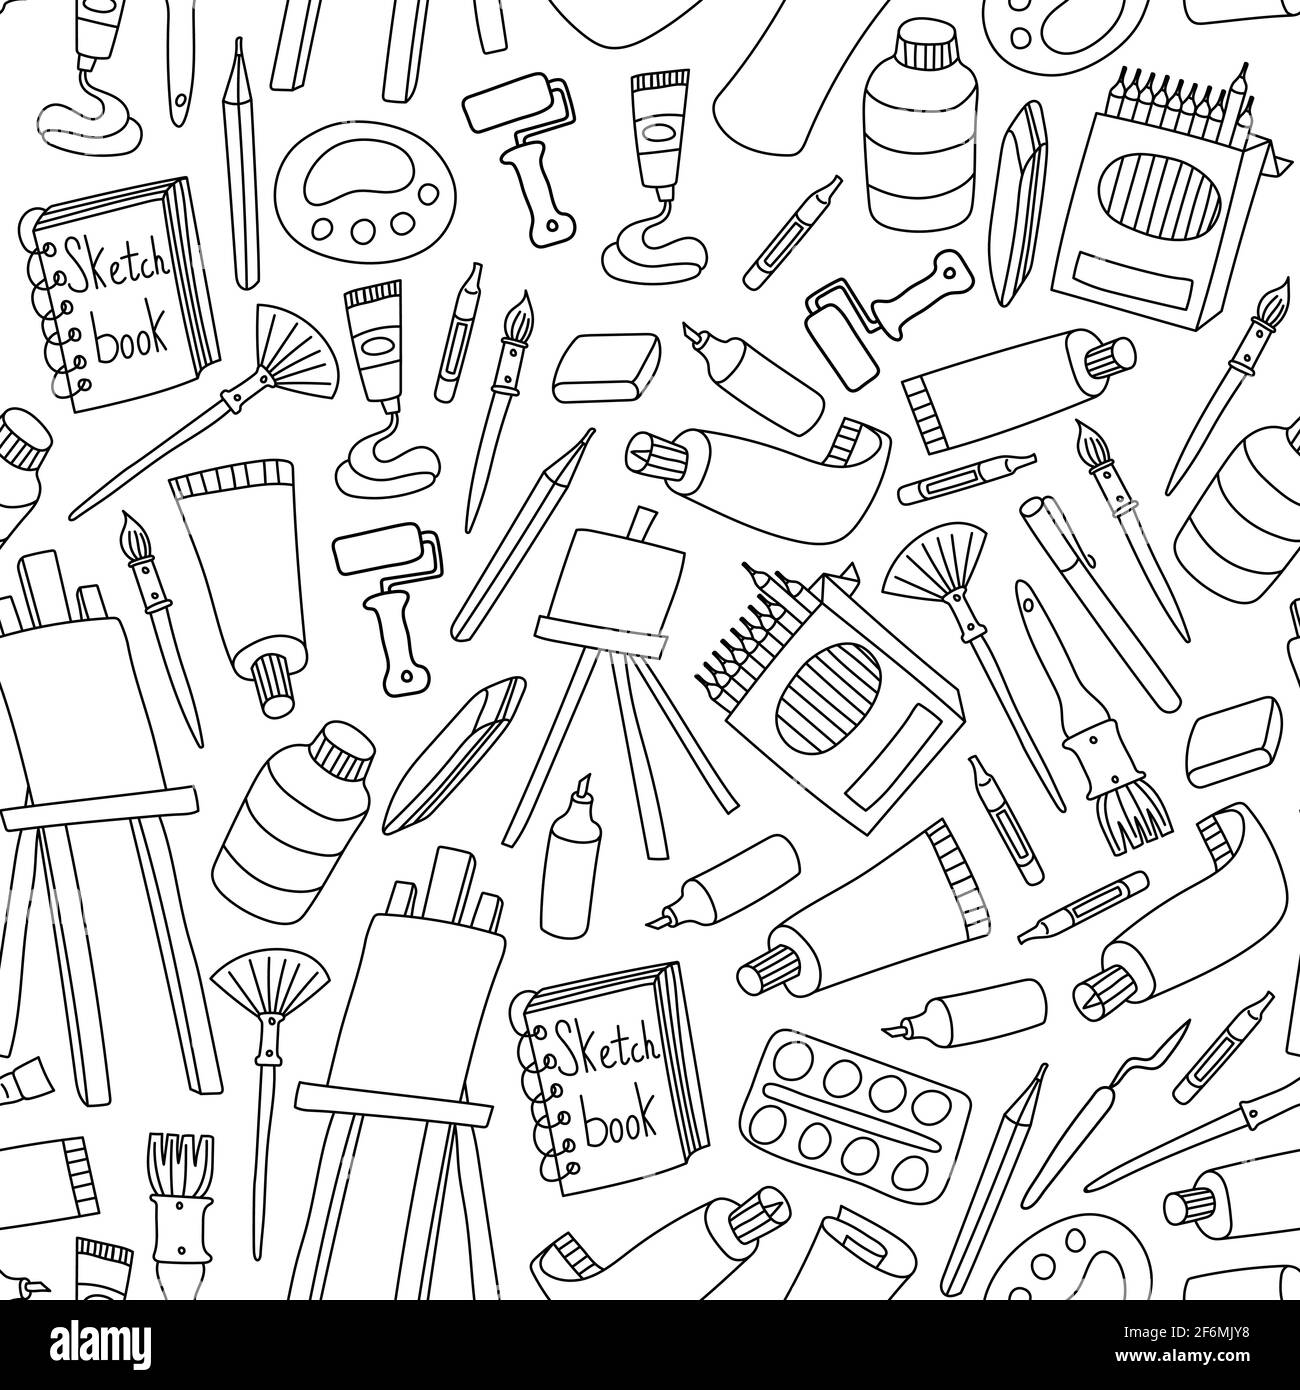 Art supplies seamless pattern. Black outline hand drawn tools for painters on white background. Vector illustration. Stock Vector